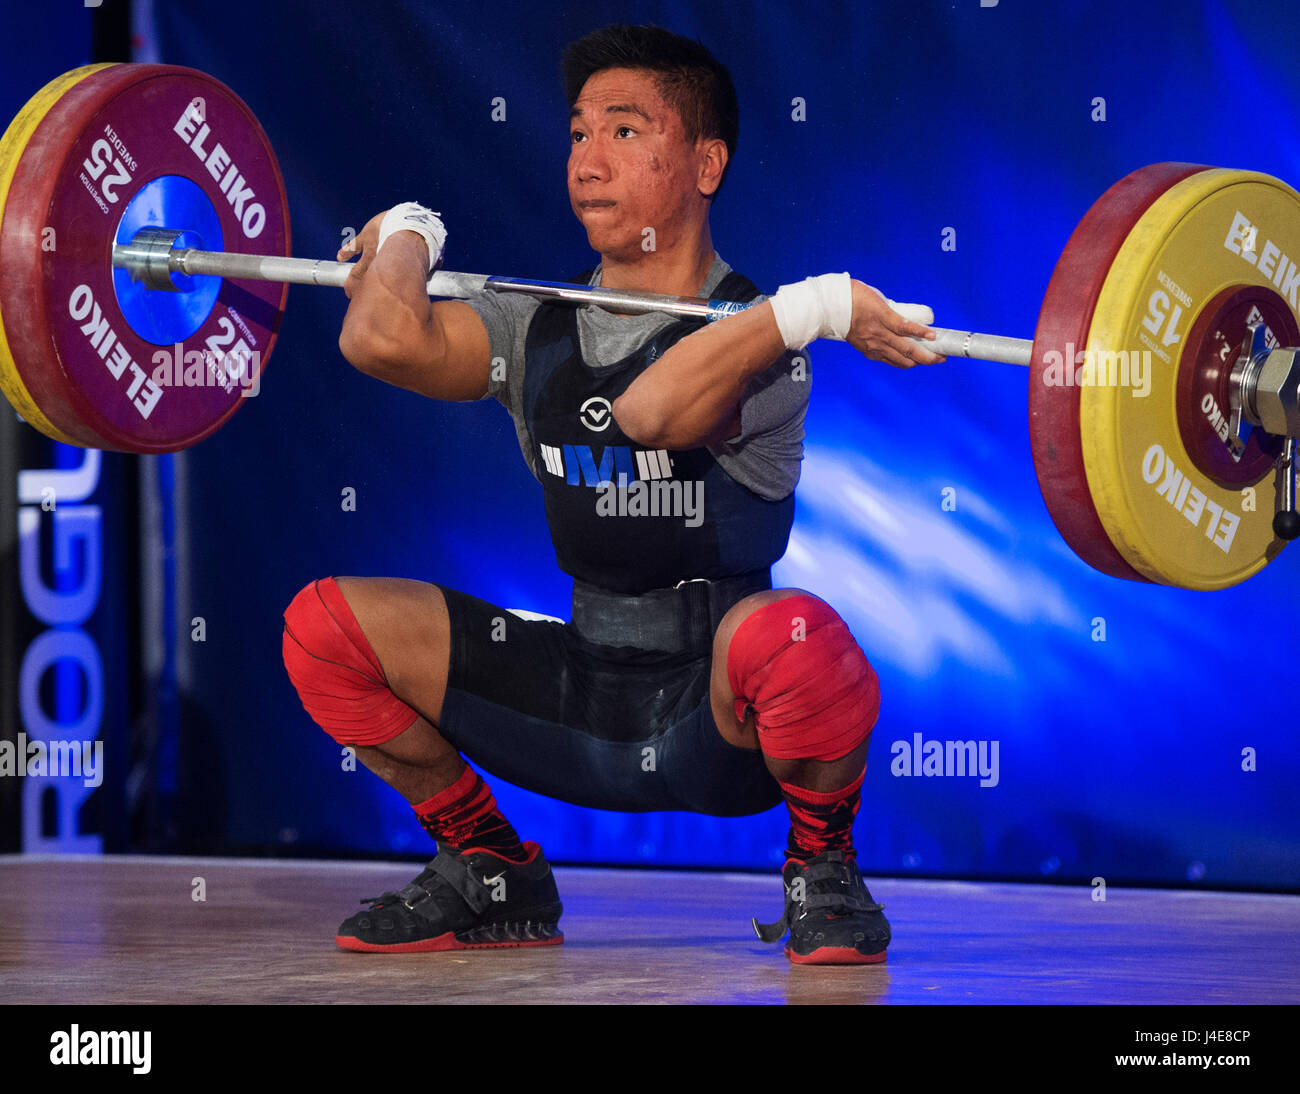 May 12, 2017 Rene Navarrete competes in the 56kg